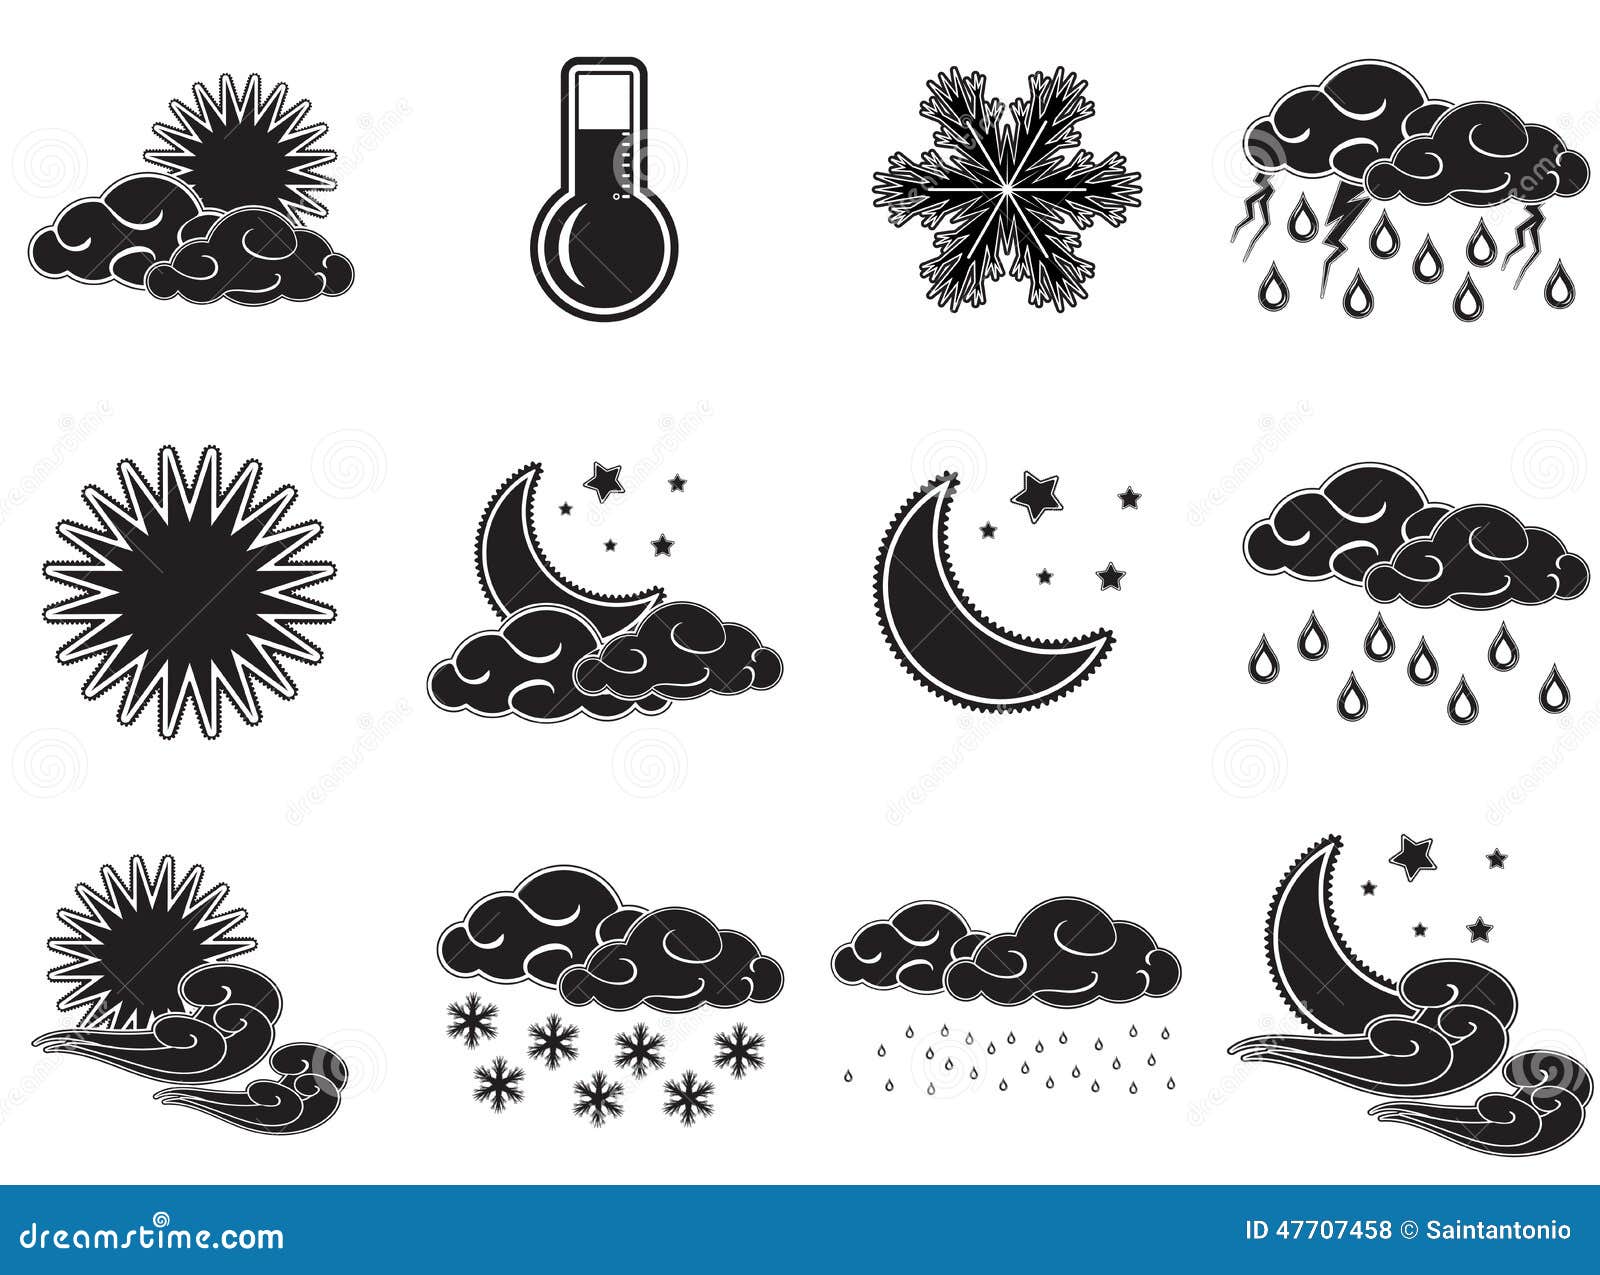 day and night clipart black and white - photo #25